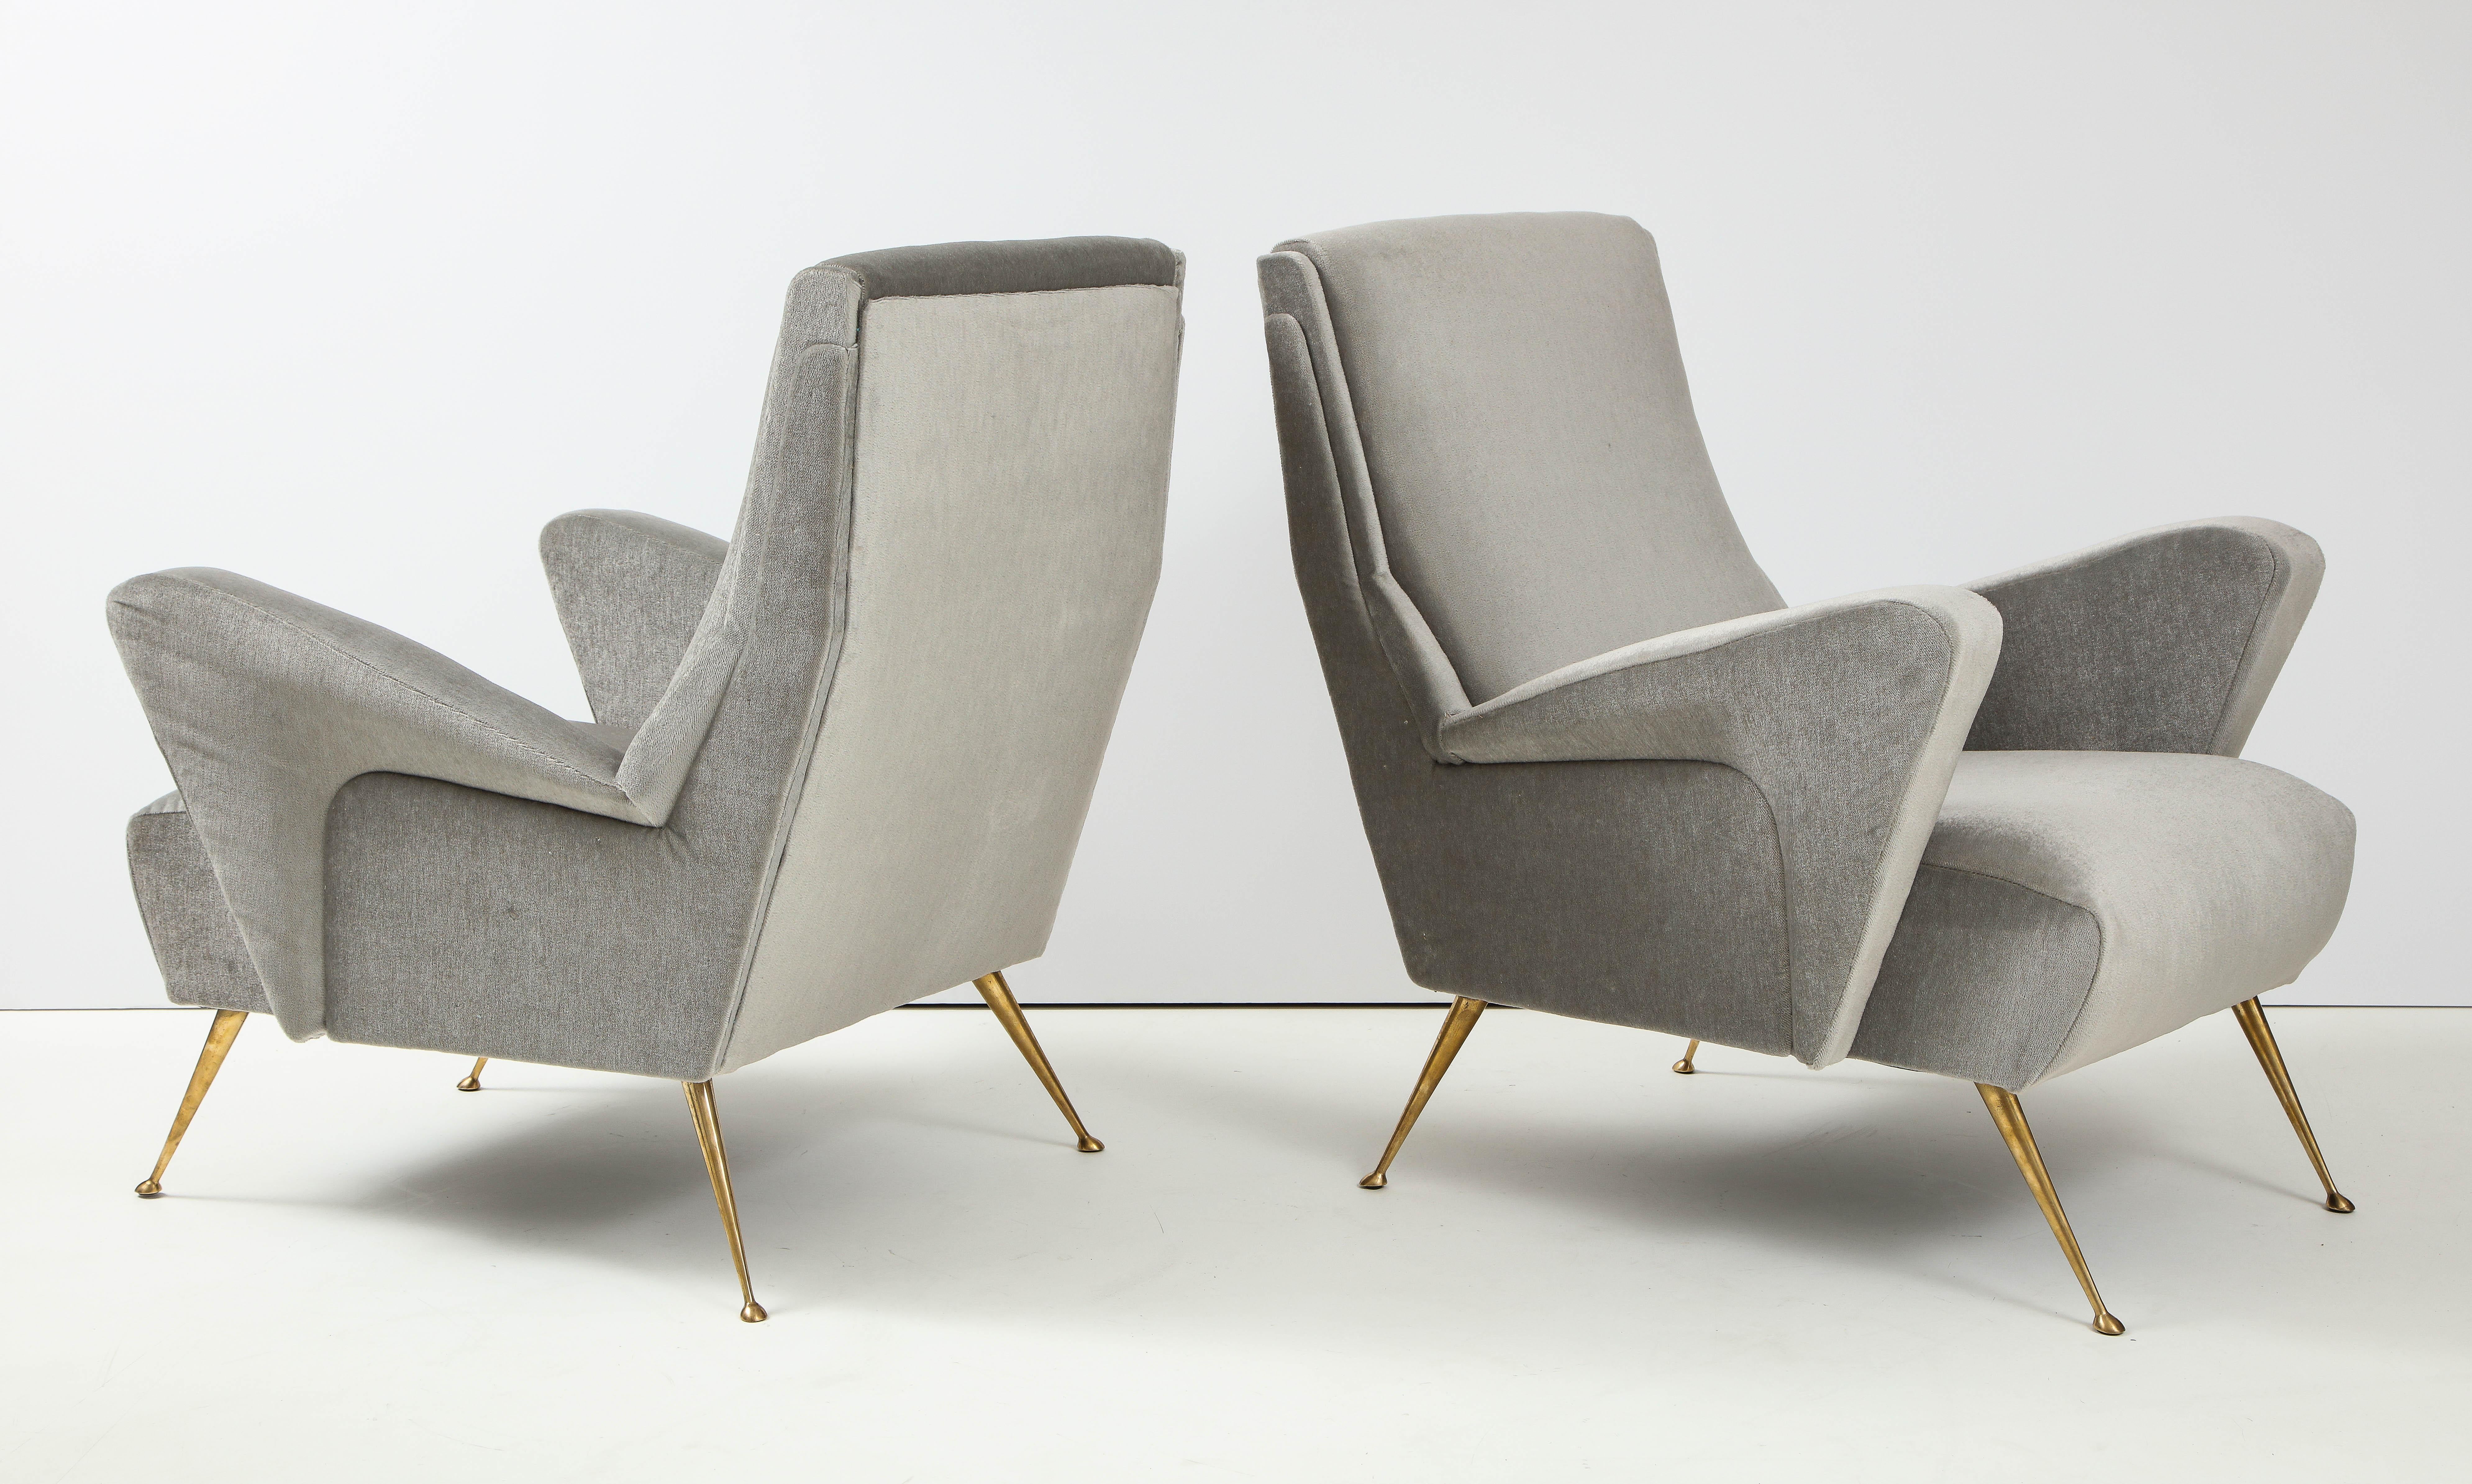 1950's Modernist Sculptural Italian Lounge Chairs with Solid Brass Legs 2